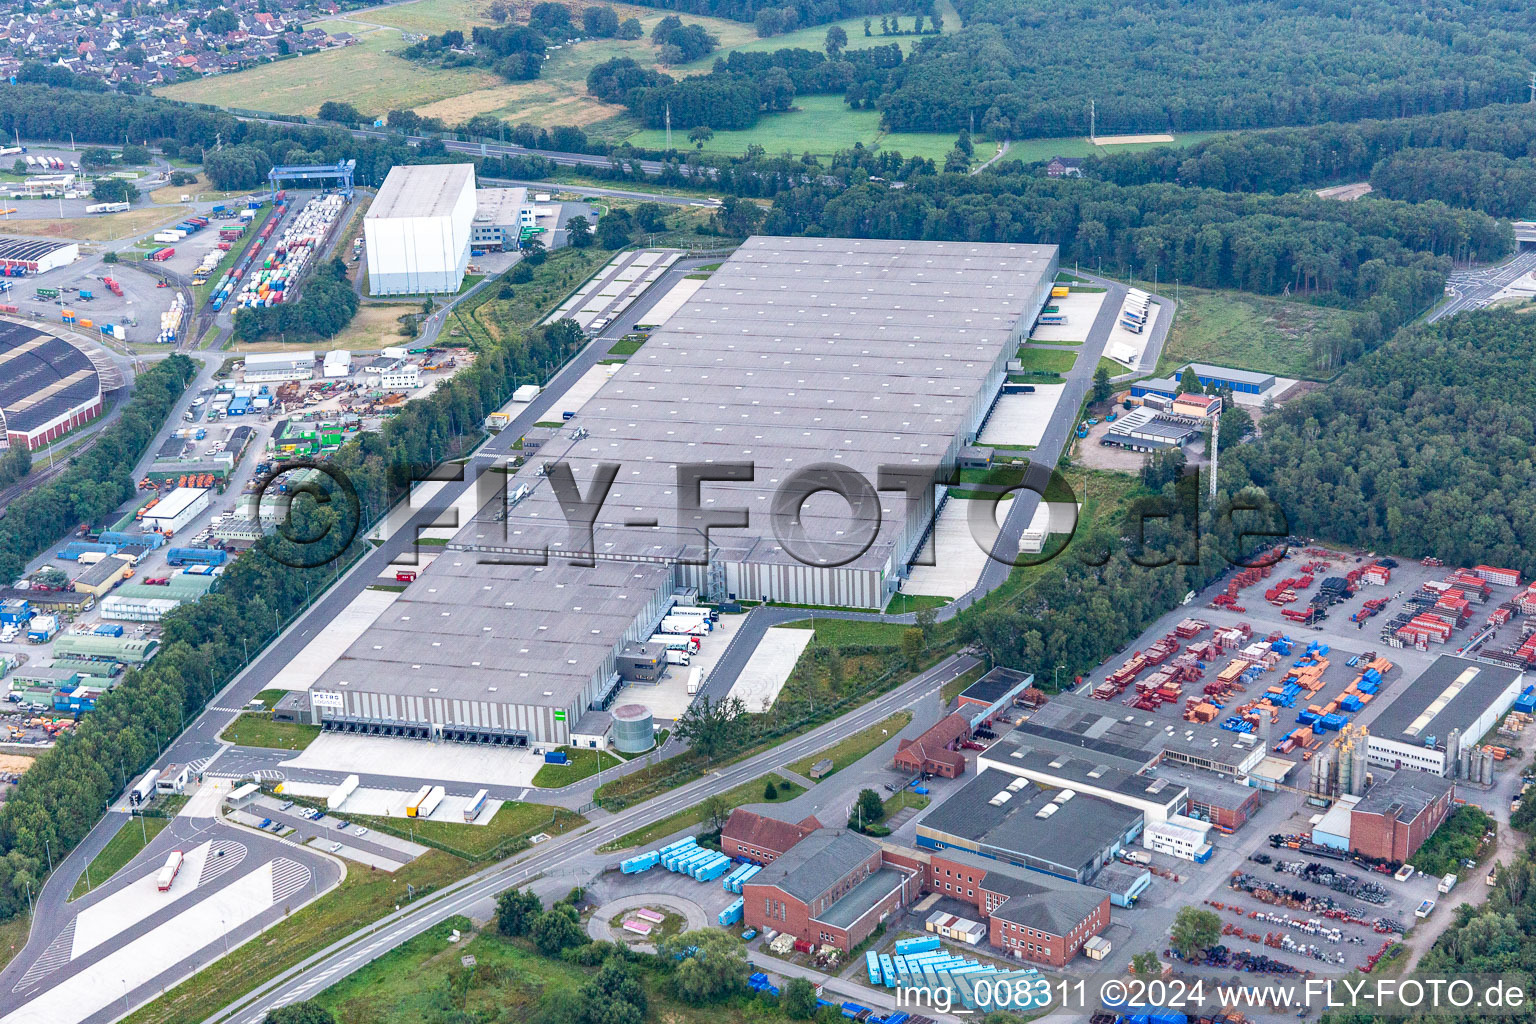 Building complex and grounds of the logistics center " Metro Central Logistic " in Marl in the state North Rhine-Westphalia, Germany